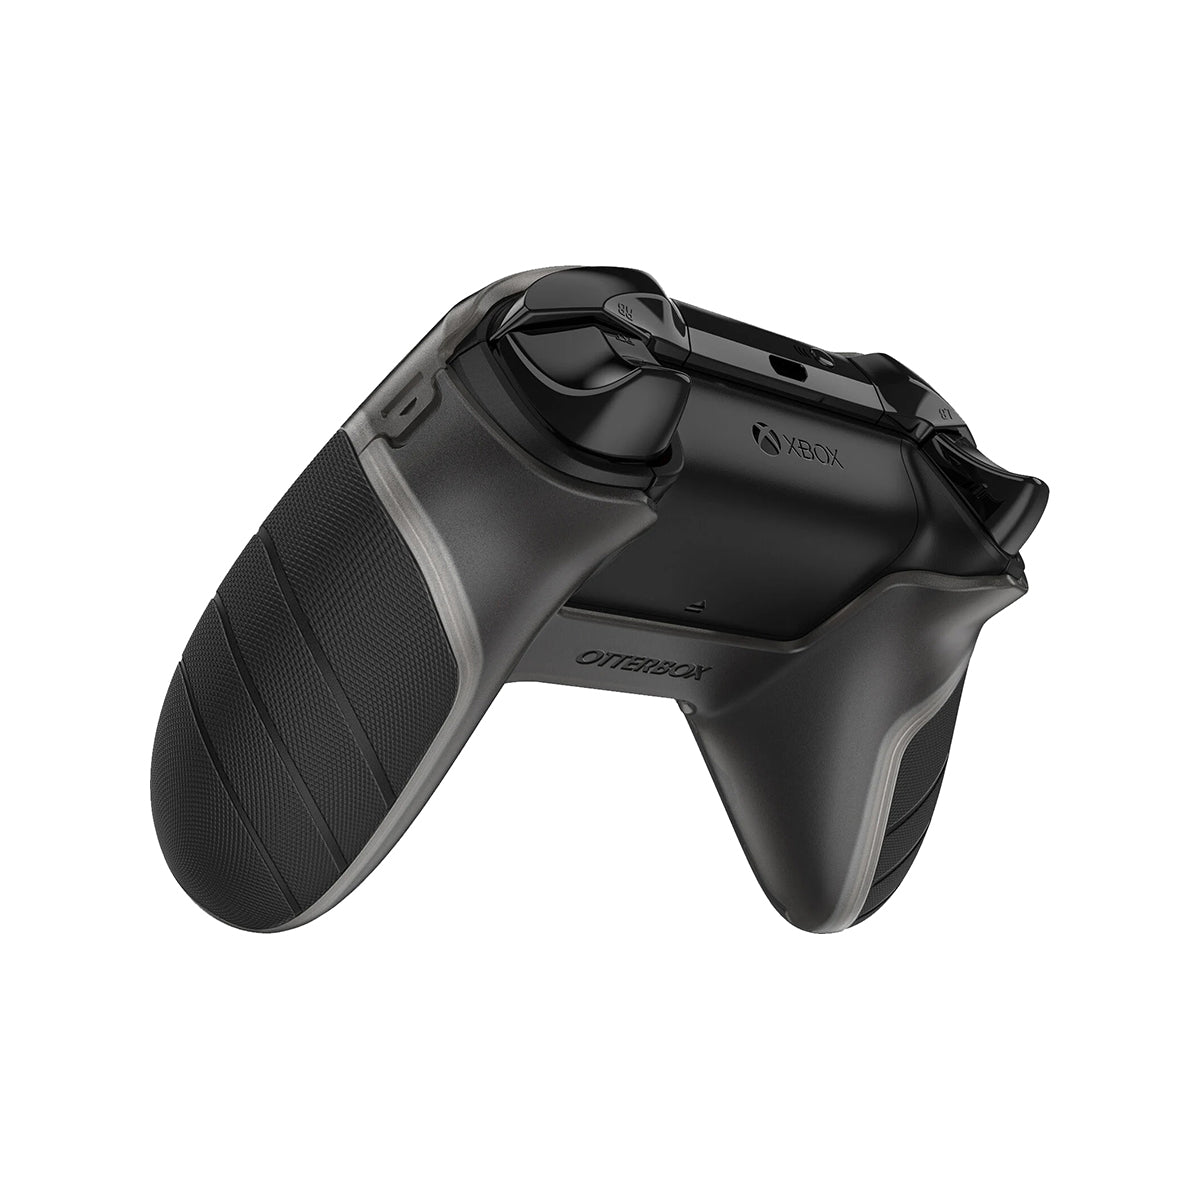 Otterbox Easy Grip Controller Shell for Xbox Gen 8 - Black.